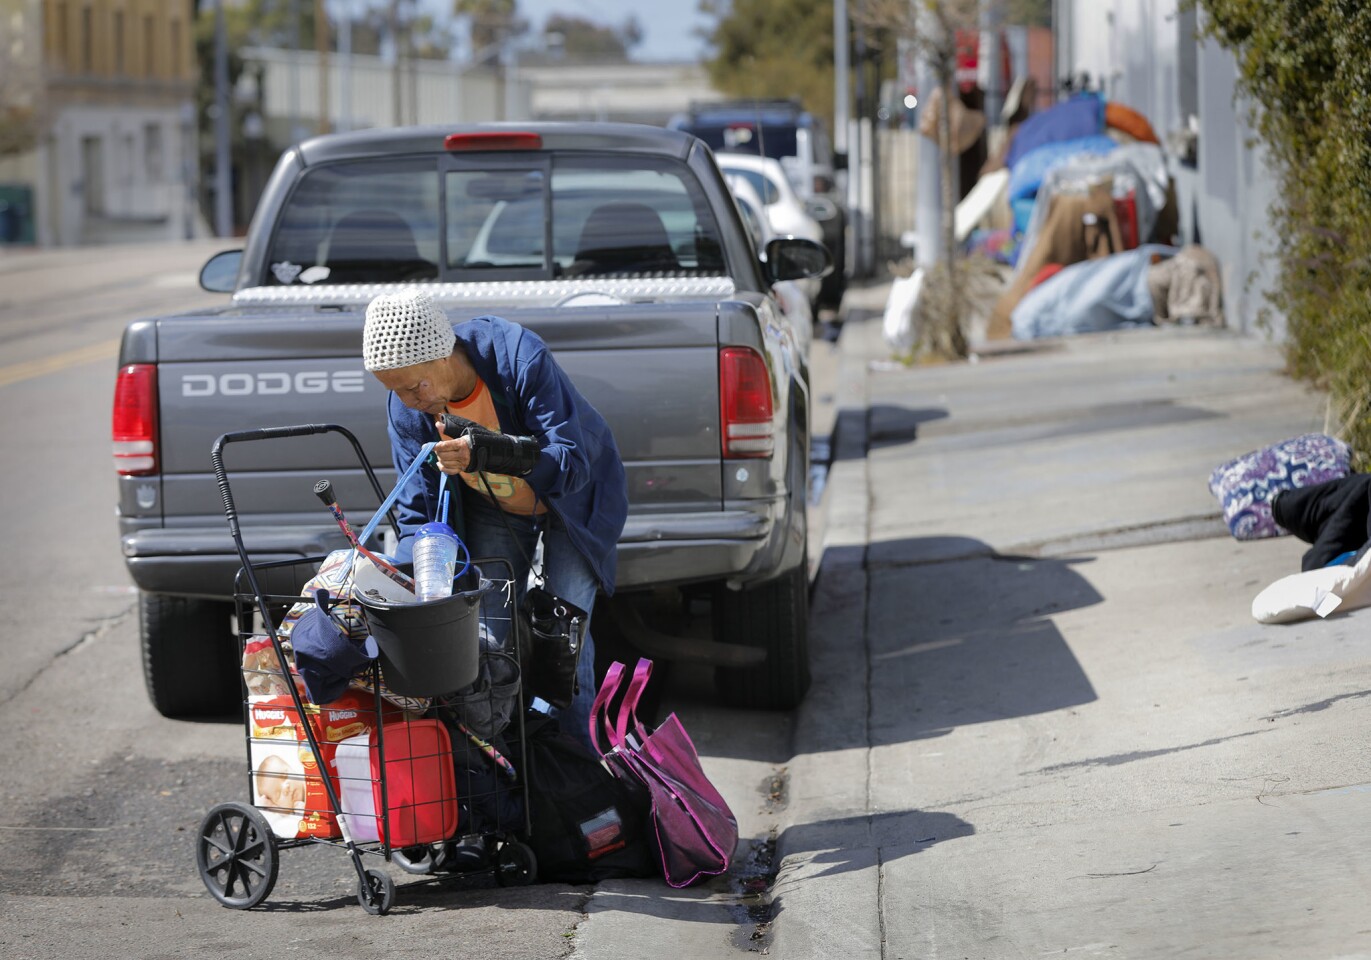 Marcella who has been homeless for the past five-years arranges some of her belongings while next to Triple K Manufacturing on Commercial Street in Sherman Heights where she sleeps. Residents and business owners are concerned the situation of homeless in the area will get worse if the city of San Diego opens a proposed storage facility for the homeless two blocks away.